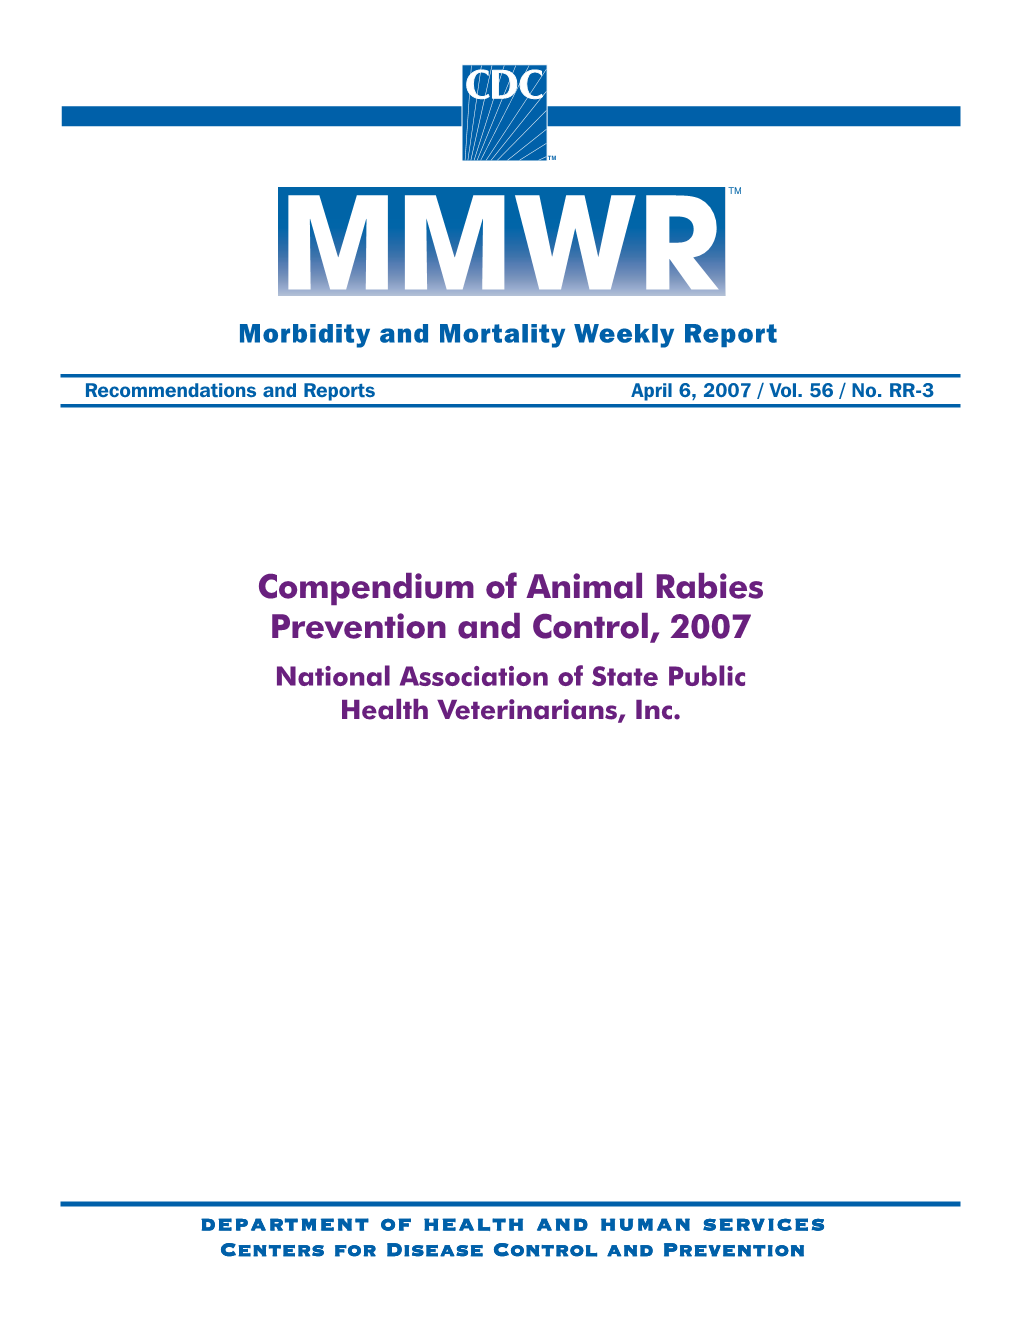 Compendium of Animal Rabies Prevention and Control, 2007 National Association of State Public Health Veterinarians, Inc